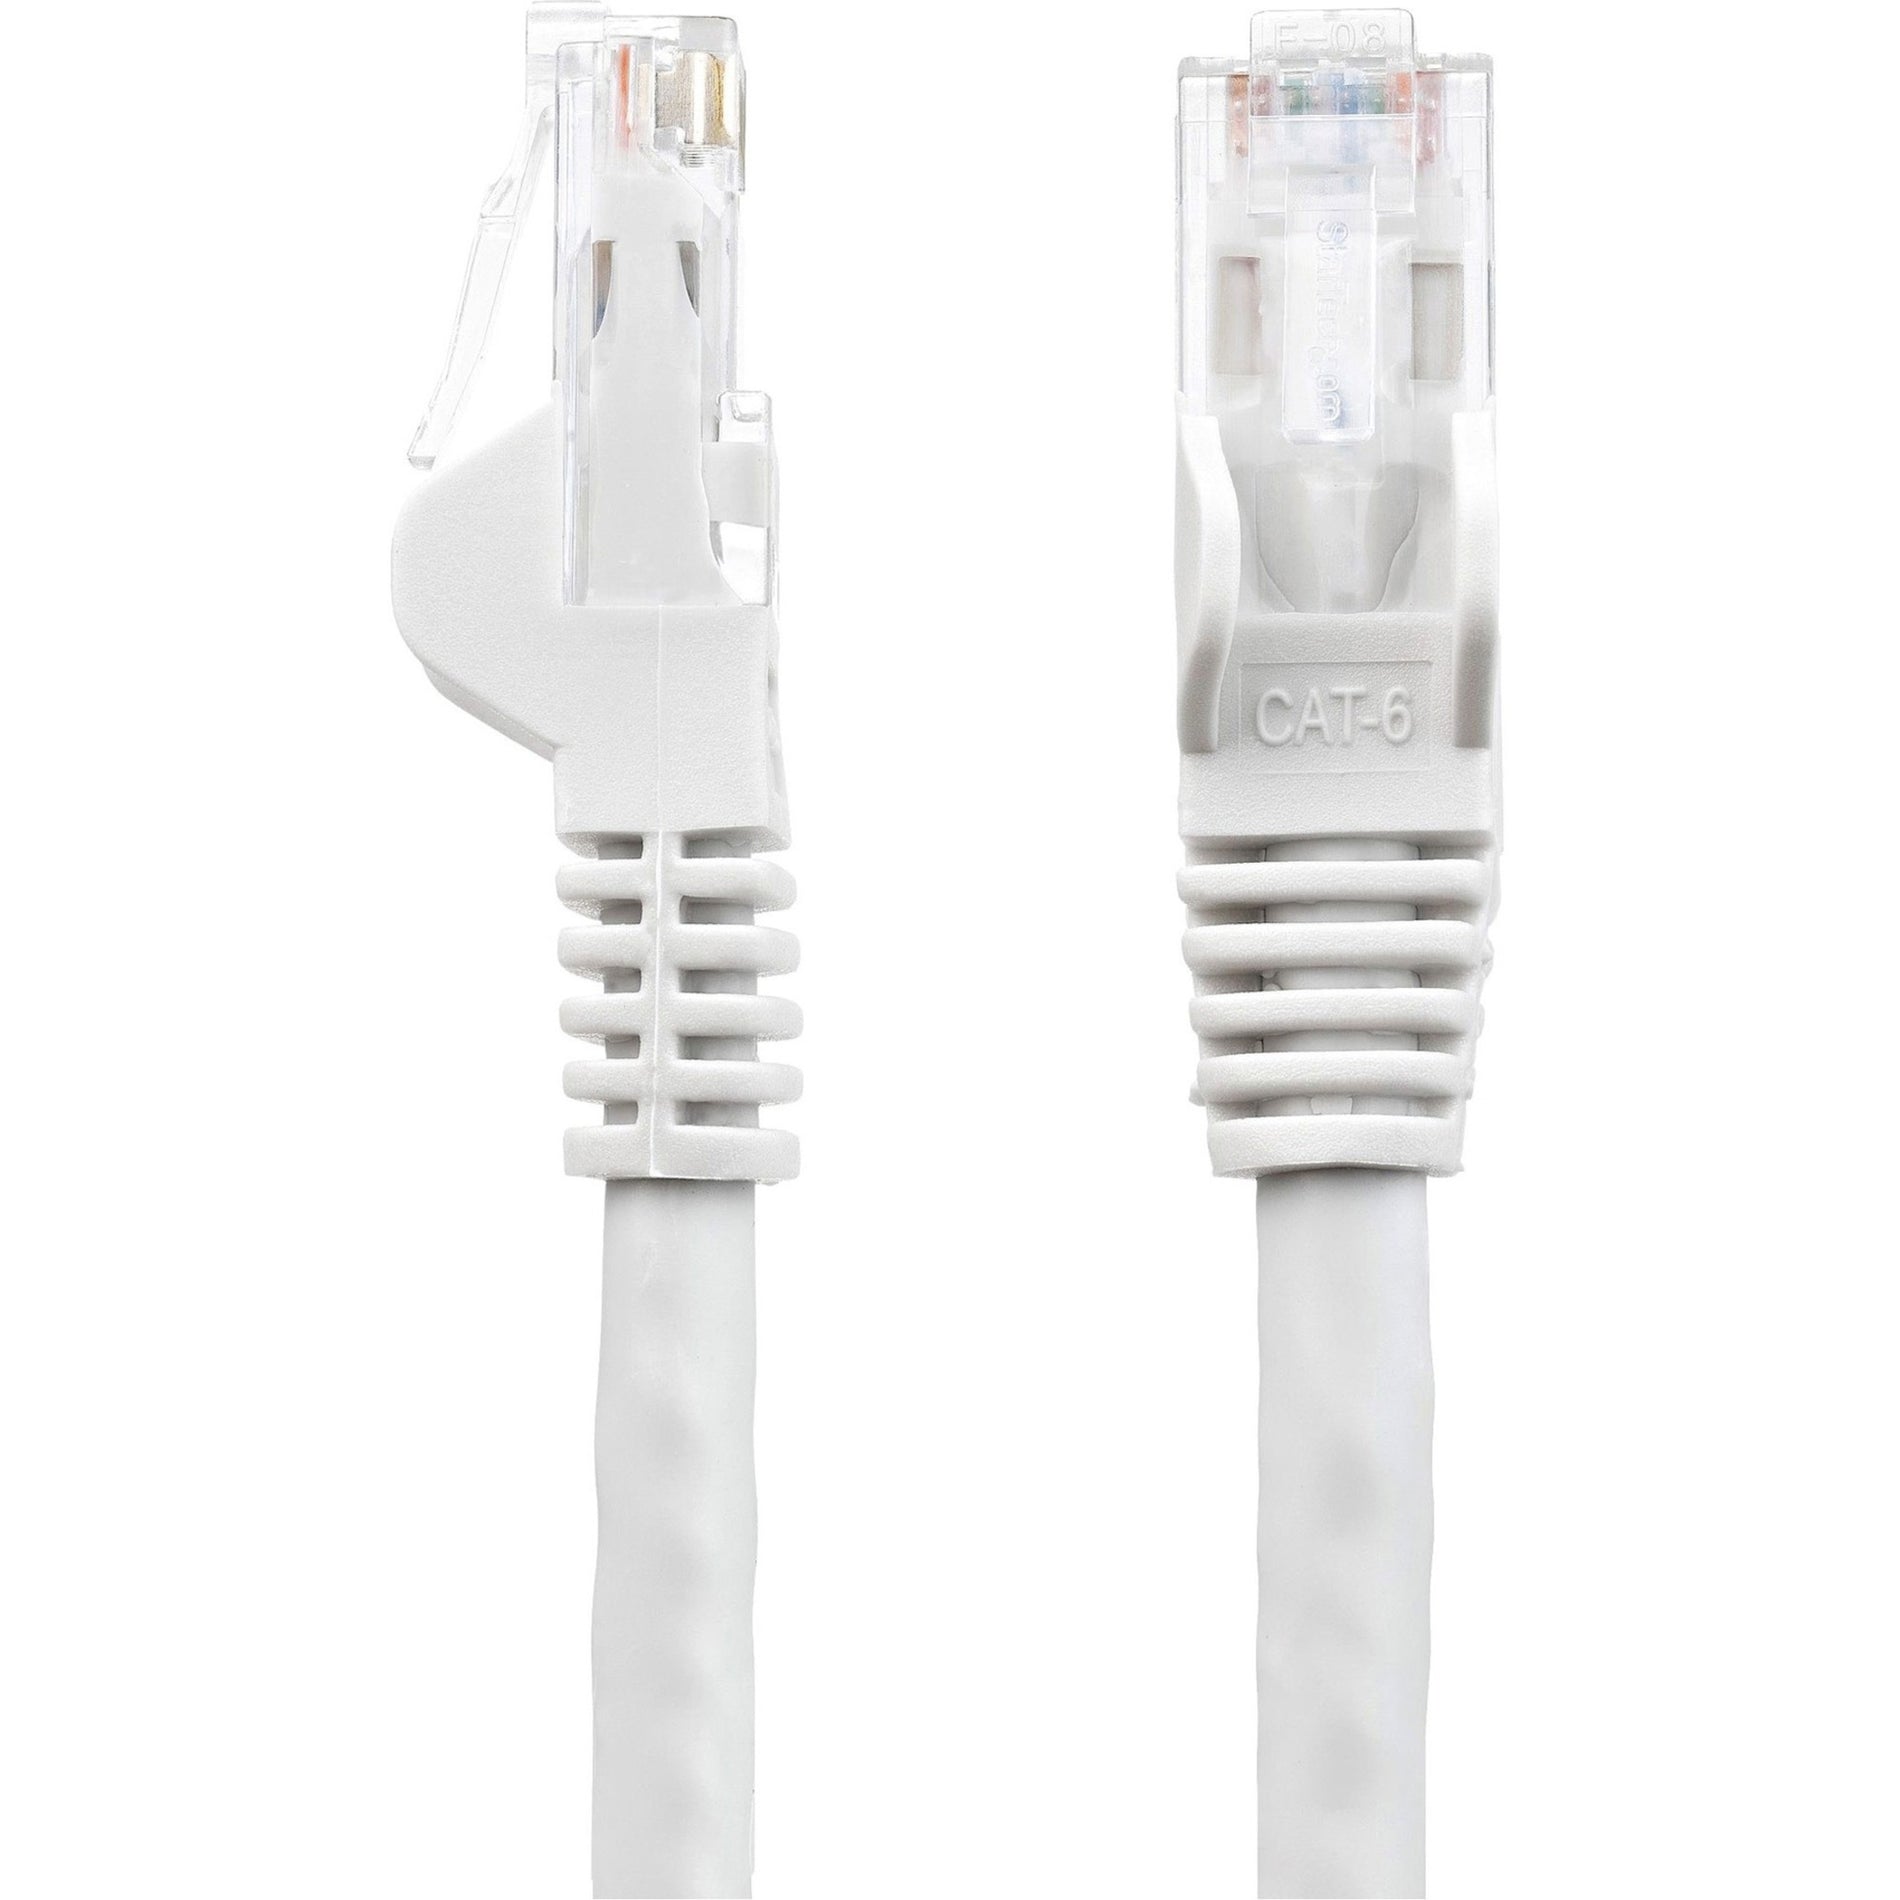 StarTech.com N6PATCH8WH Cat6 Patch Cable, 8 ft White Ethernet Cable with Snagless RJ45 Connectors